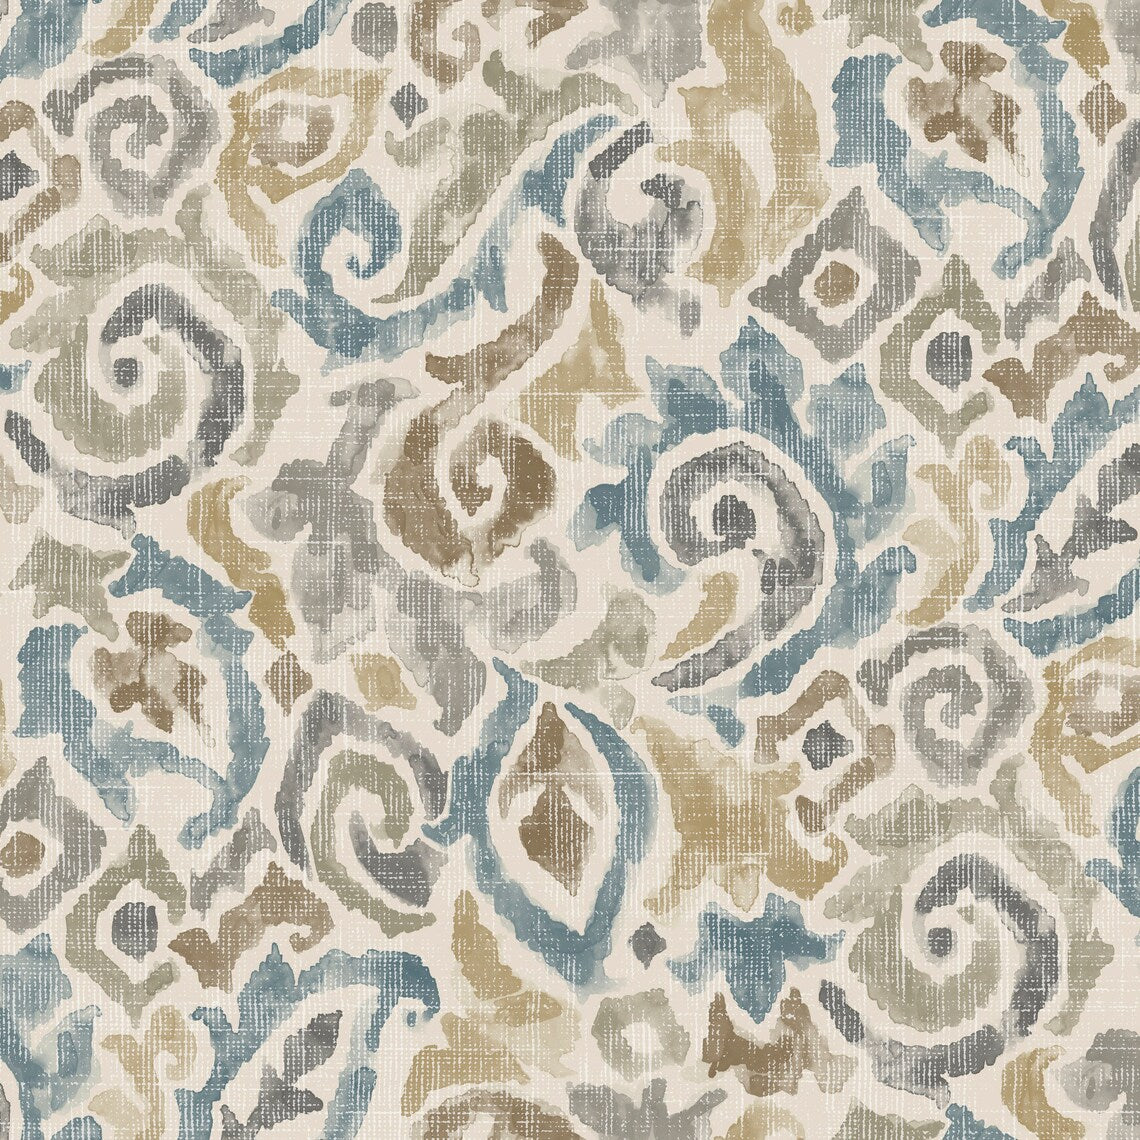 duvet cover in Jester Harbor Blue Paisley Watercolor